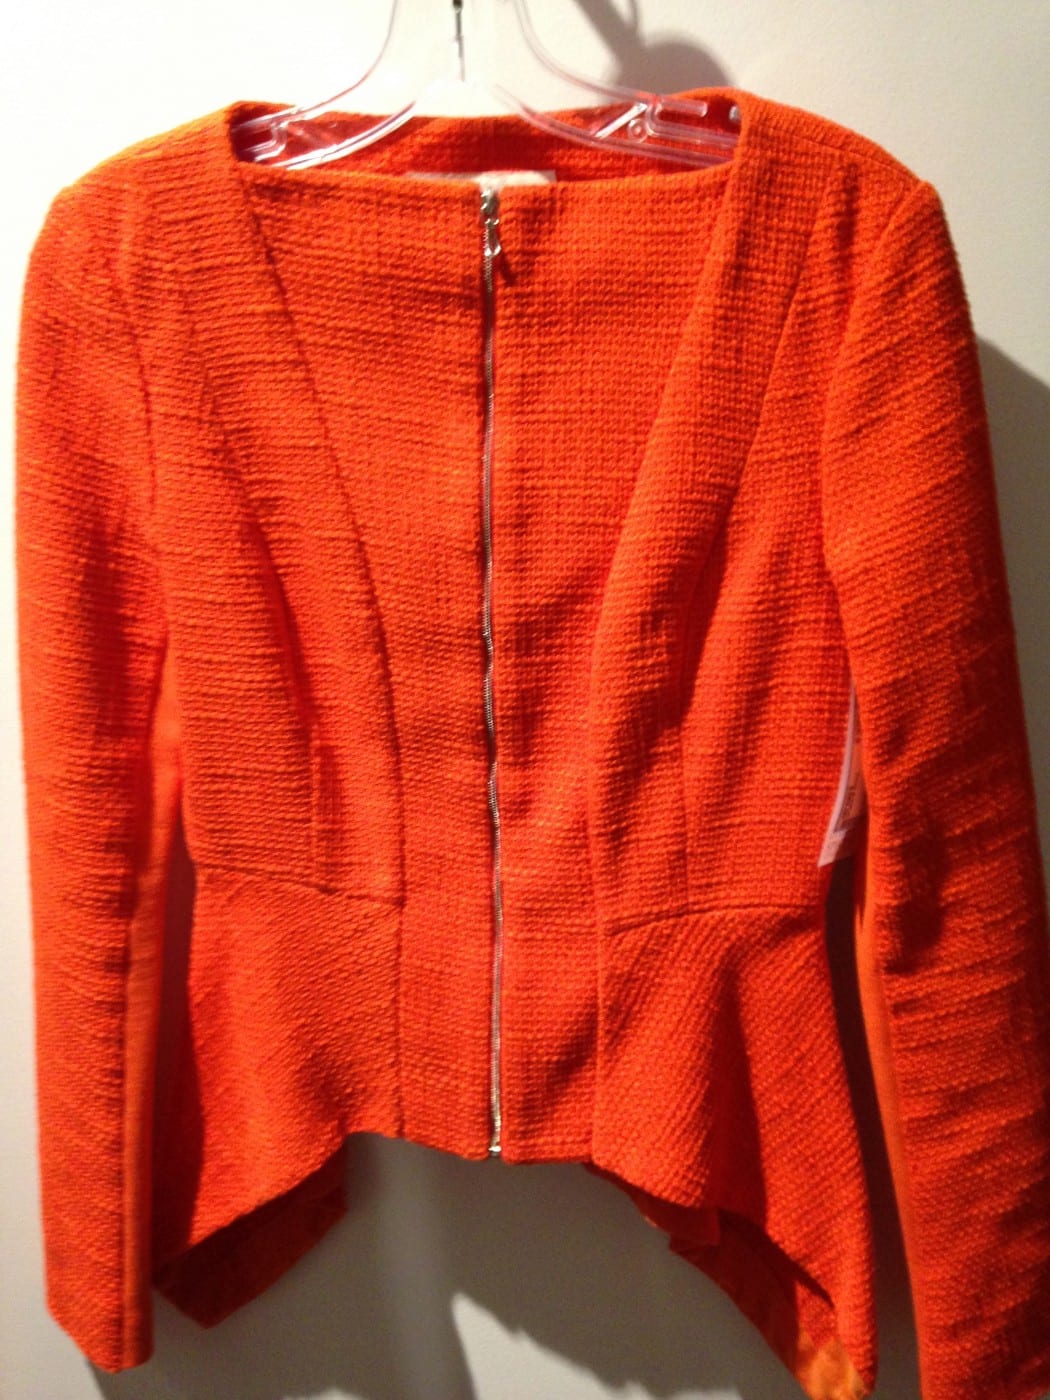 Current Obsession: Orange Willow Jacket - Catenya McHenry